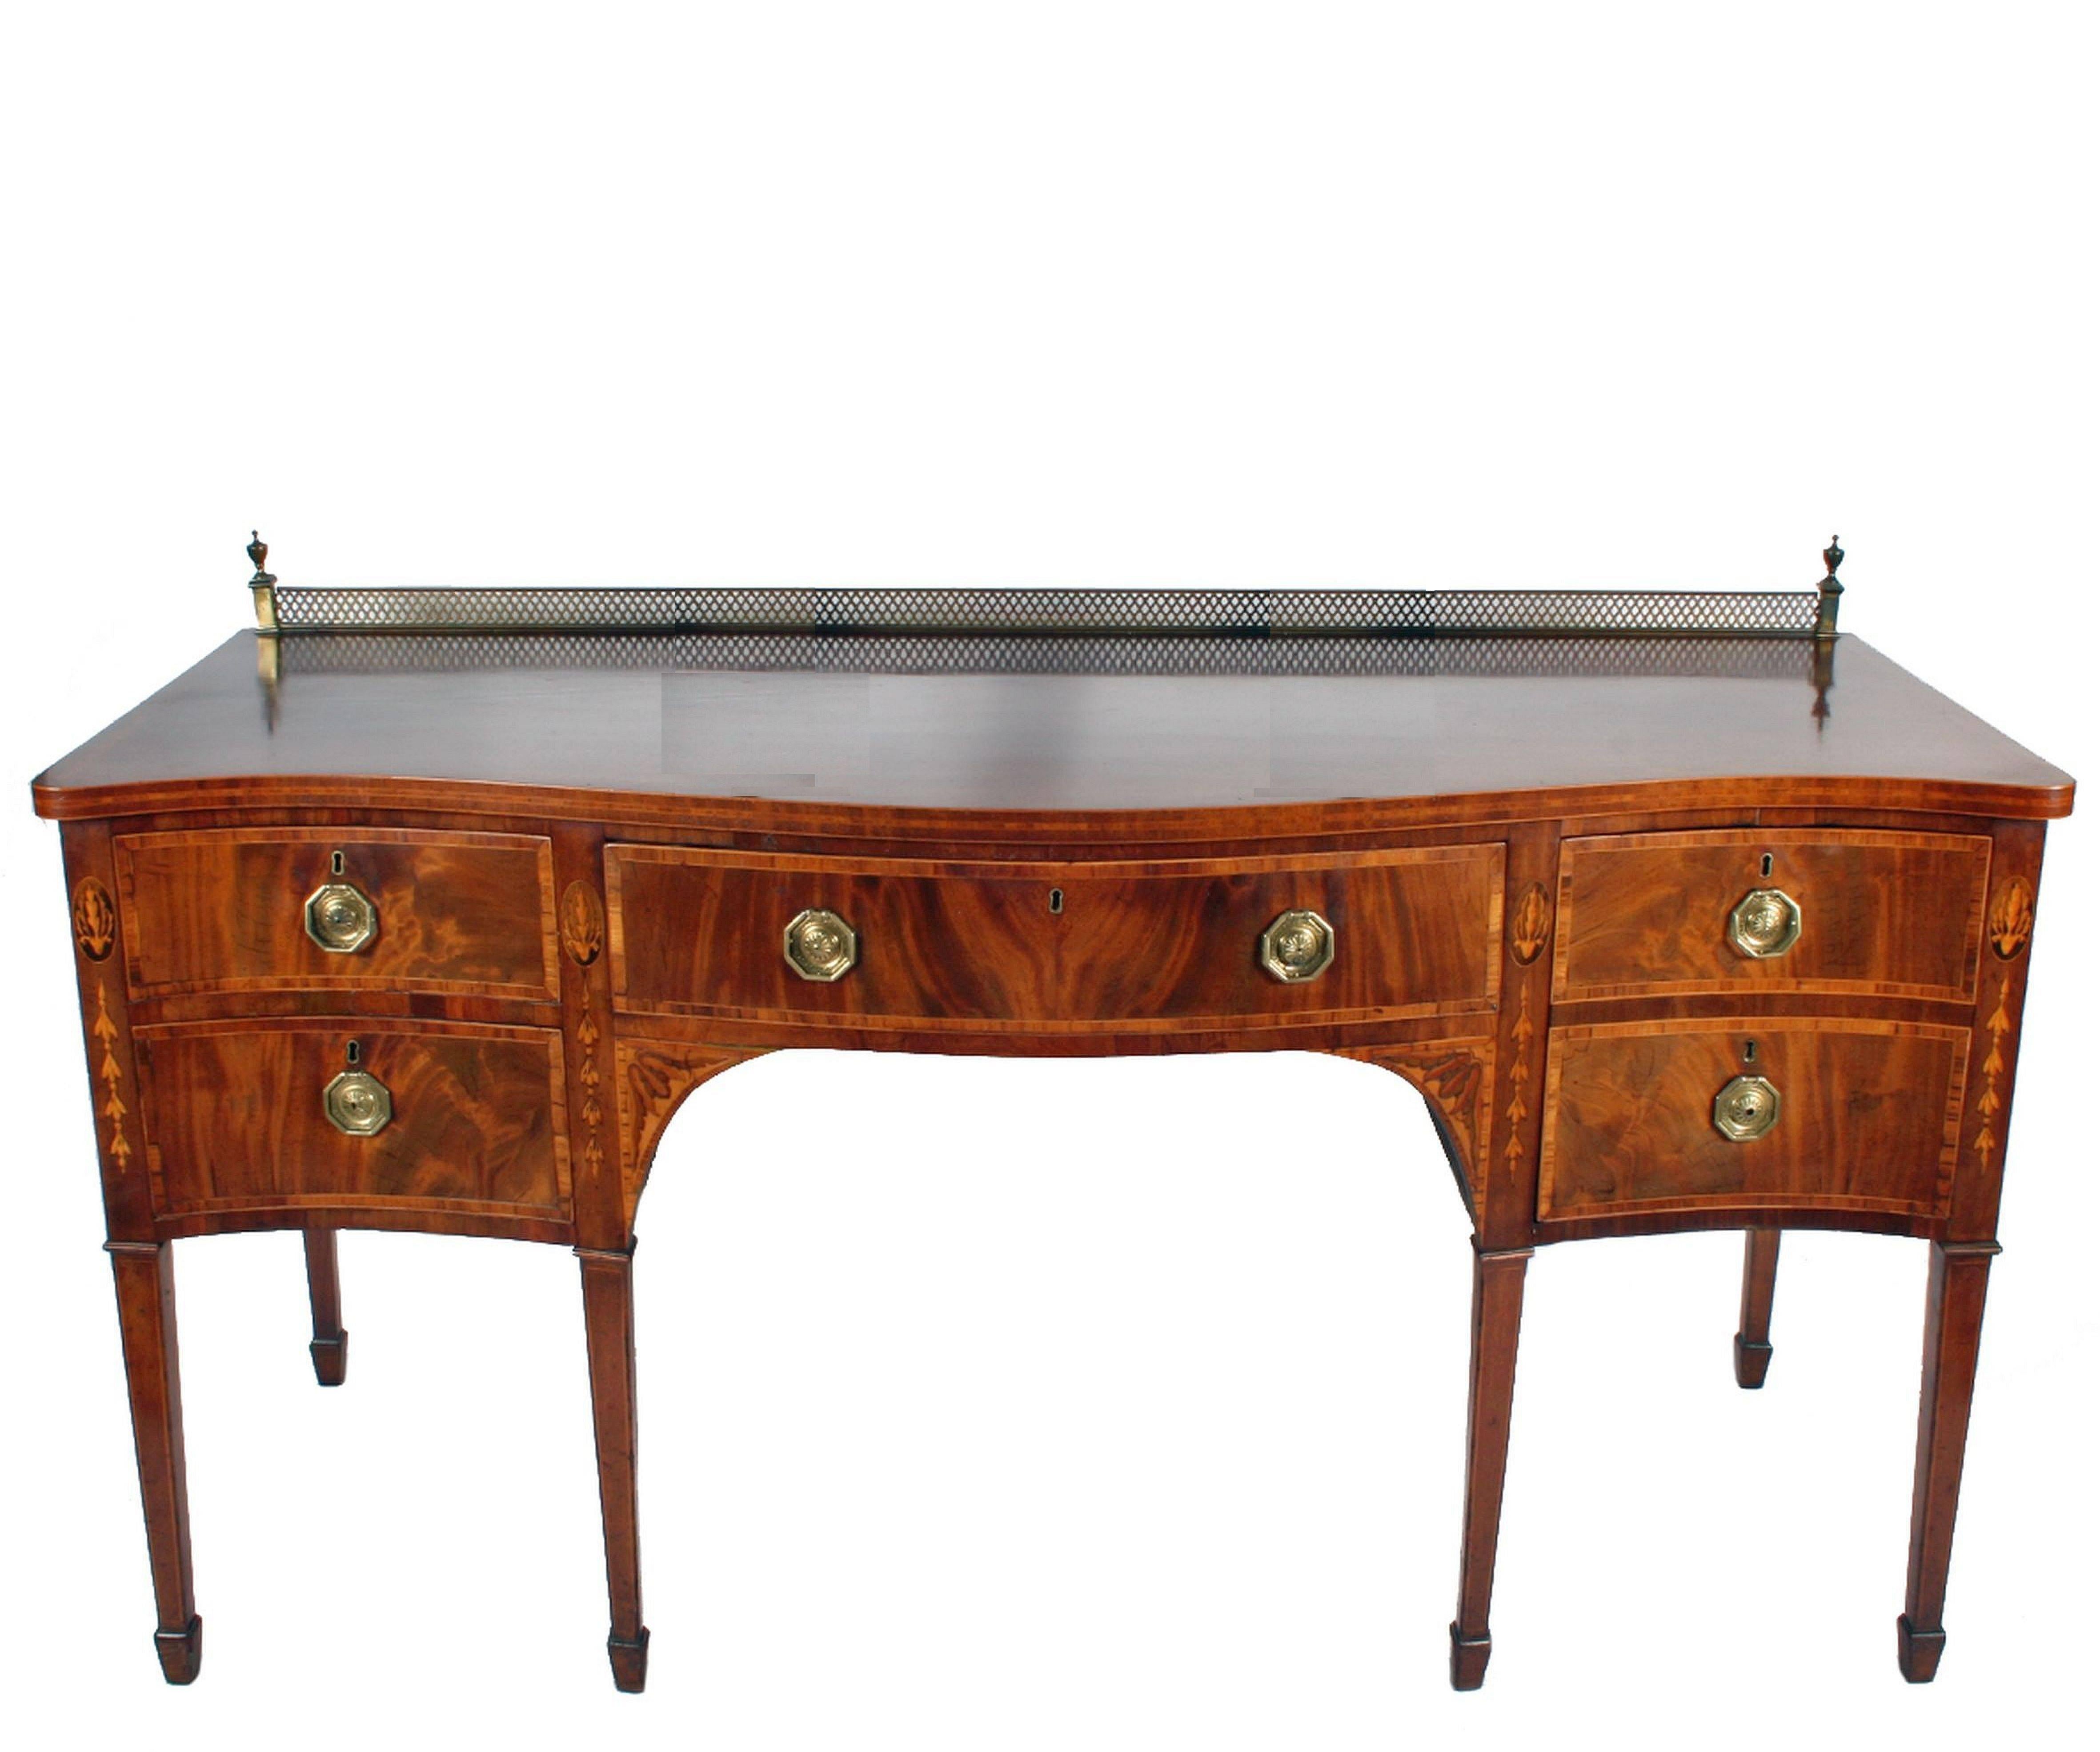 A handsome English sideboard server (or serving console) from the Georgian era, featuring a serpentine moulded top with pierced brass back rail with urn finials, over an inlaid mahogany frieze with two left-facing small drawers, bowed middle large